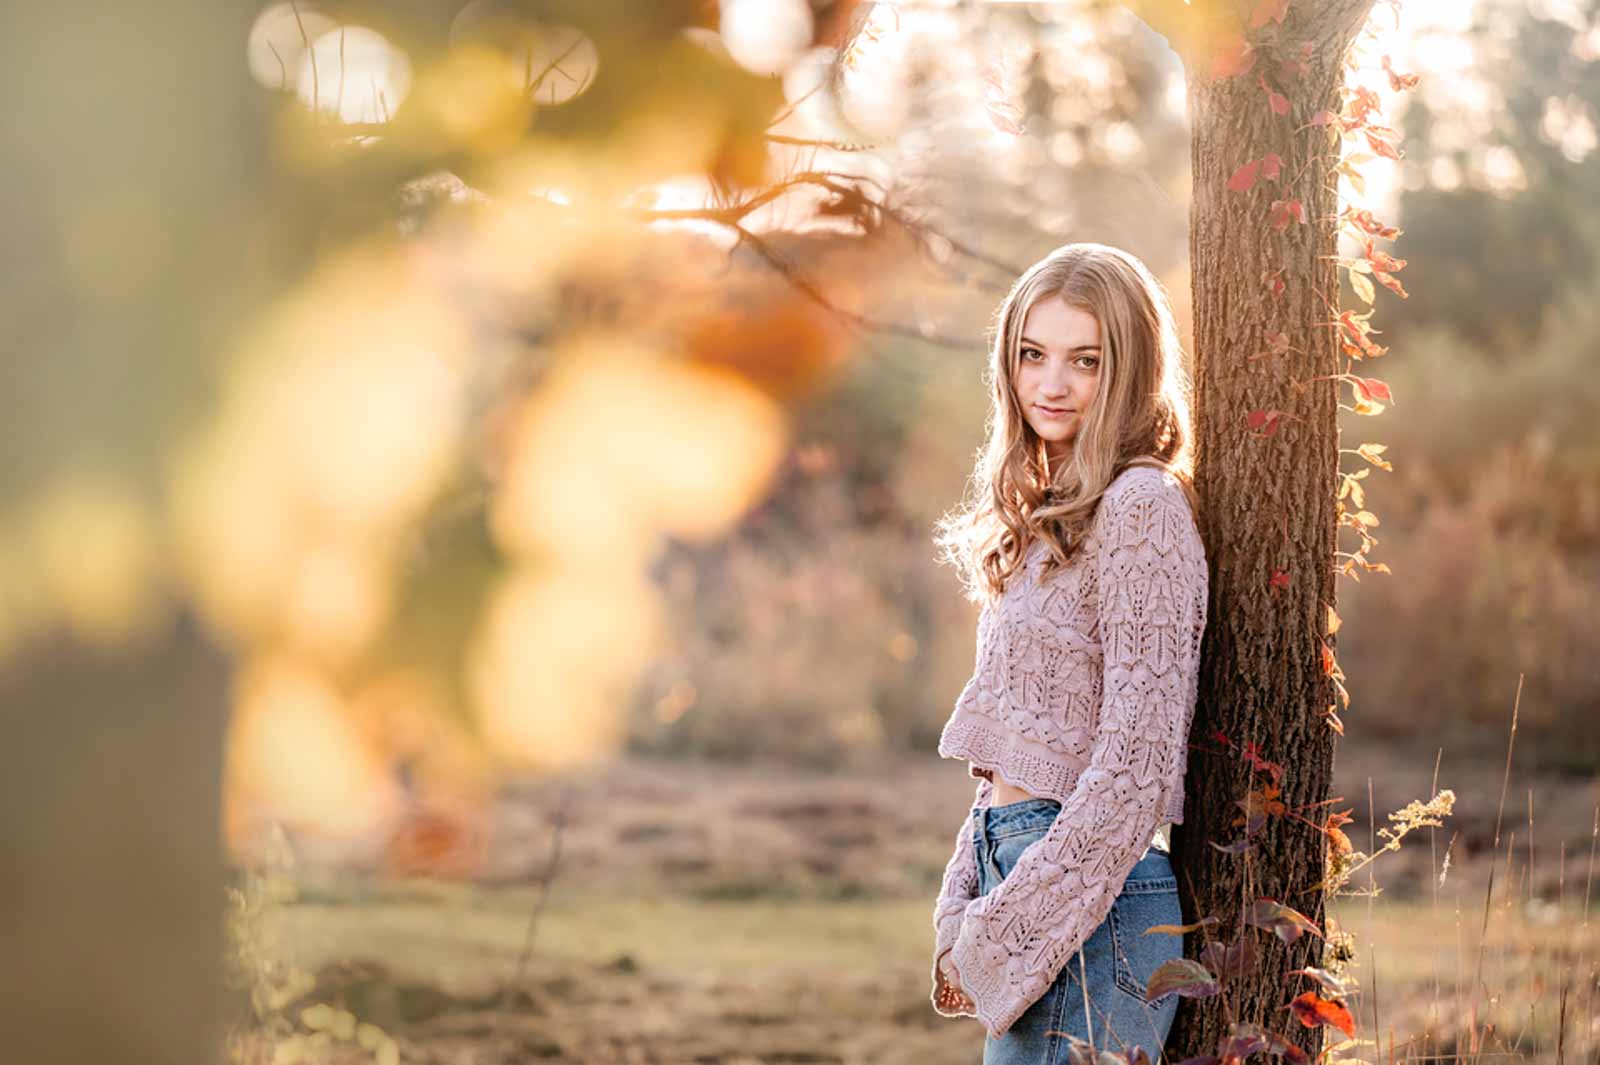 Senior Girl leaning against a tree in a fall setting